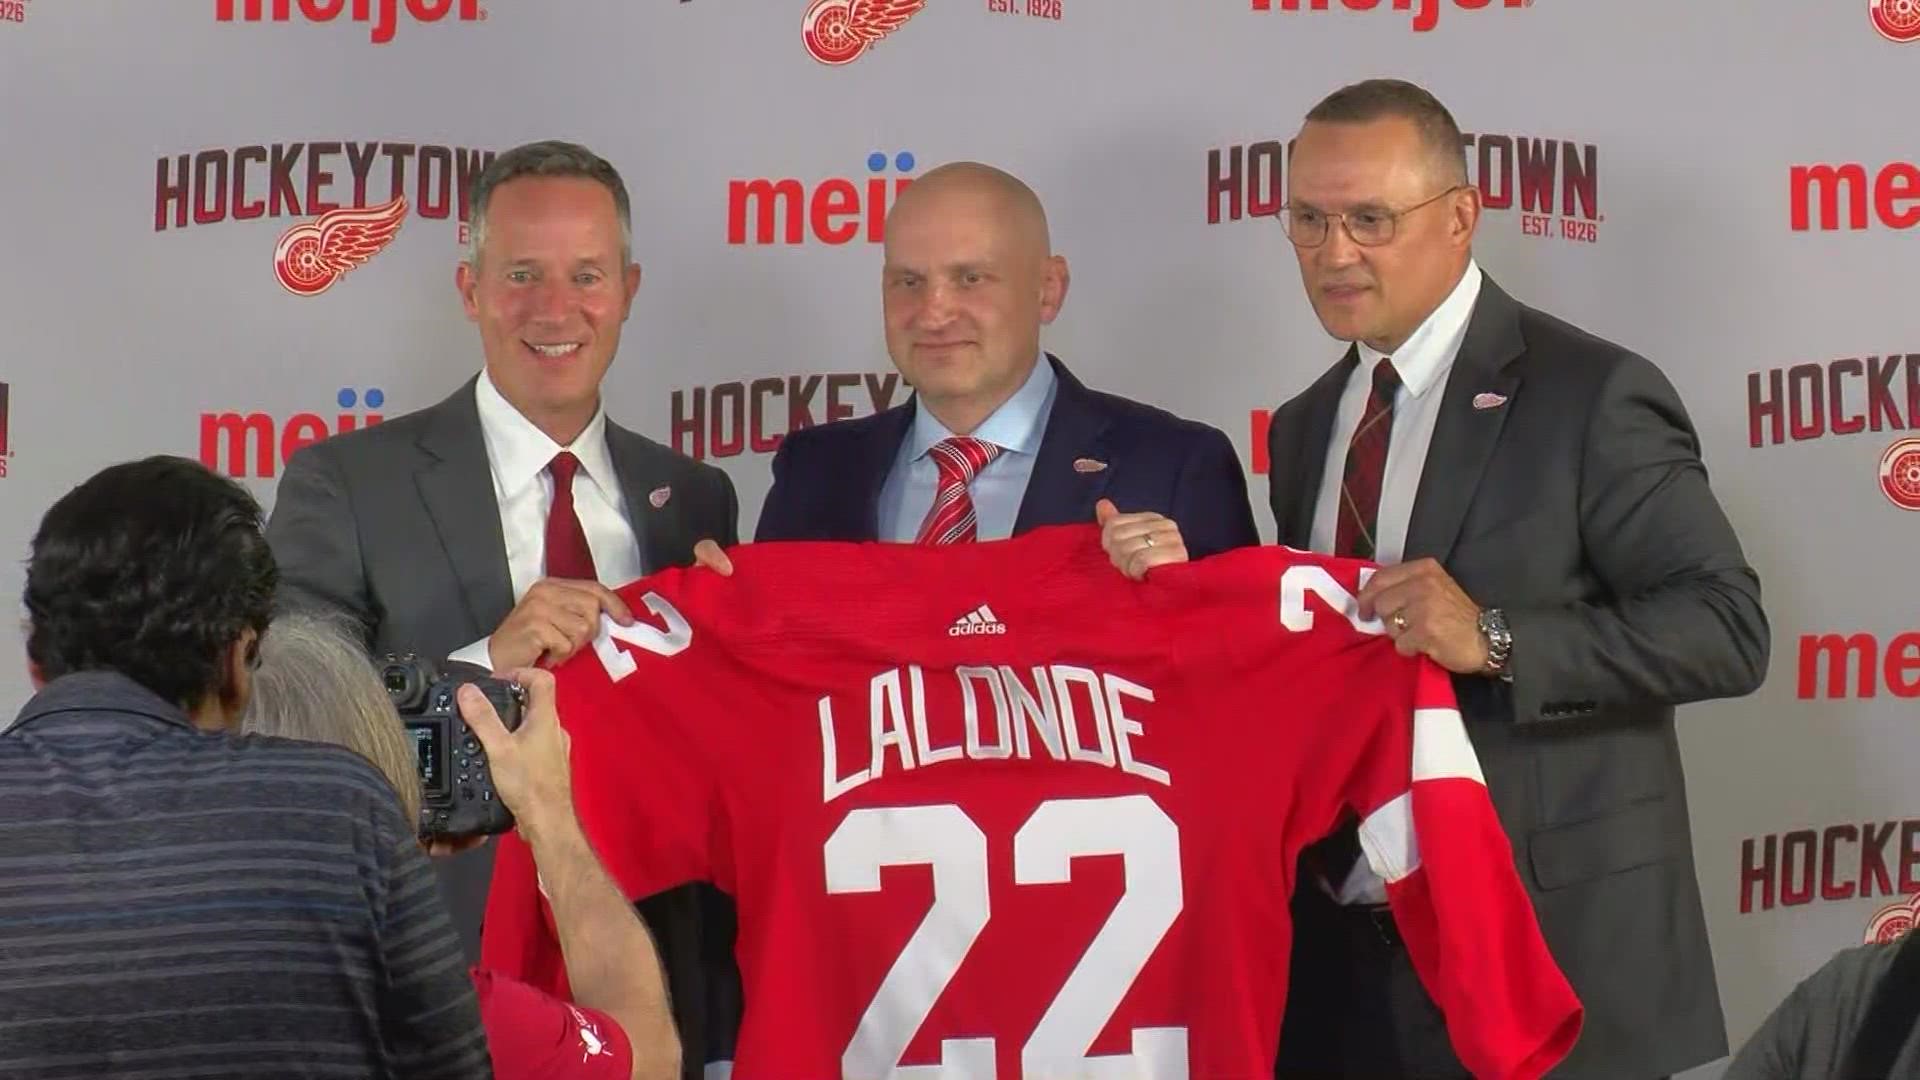 Former Toledo Walleye coach Derek Lalonde will serve as the 28th head coach of the Detroit Red Wings. In his first press conference, Lalonde lays out his plans.